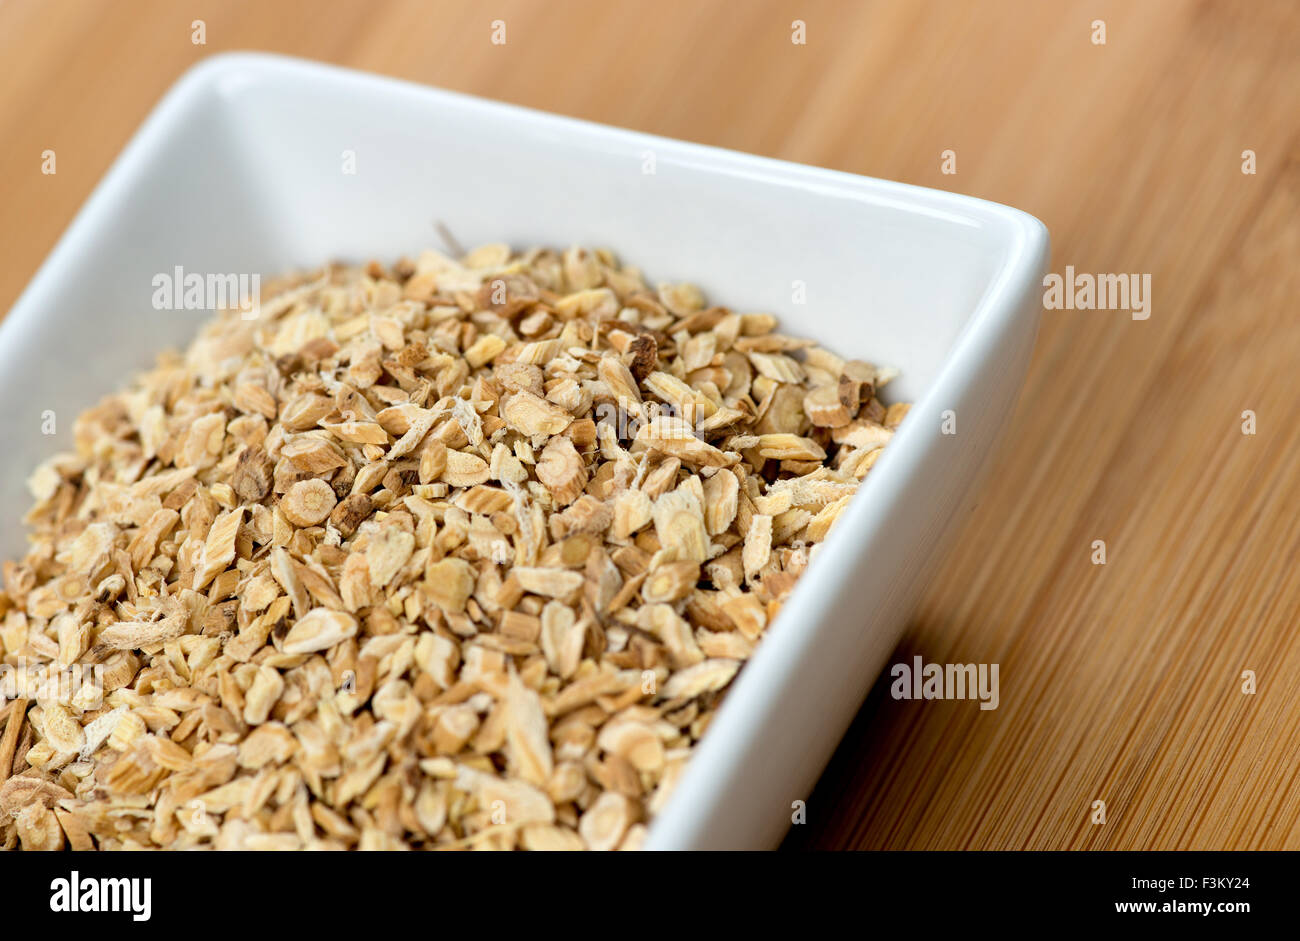 Macro of astragalus root chips against a wooden board Stock Photo